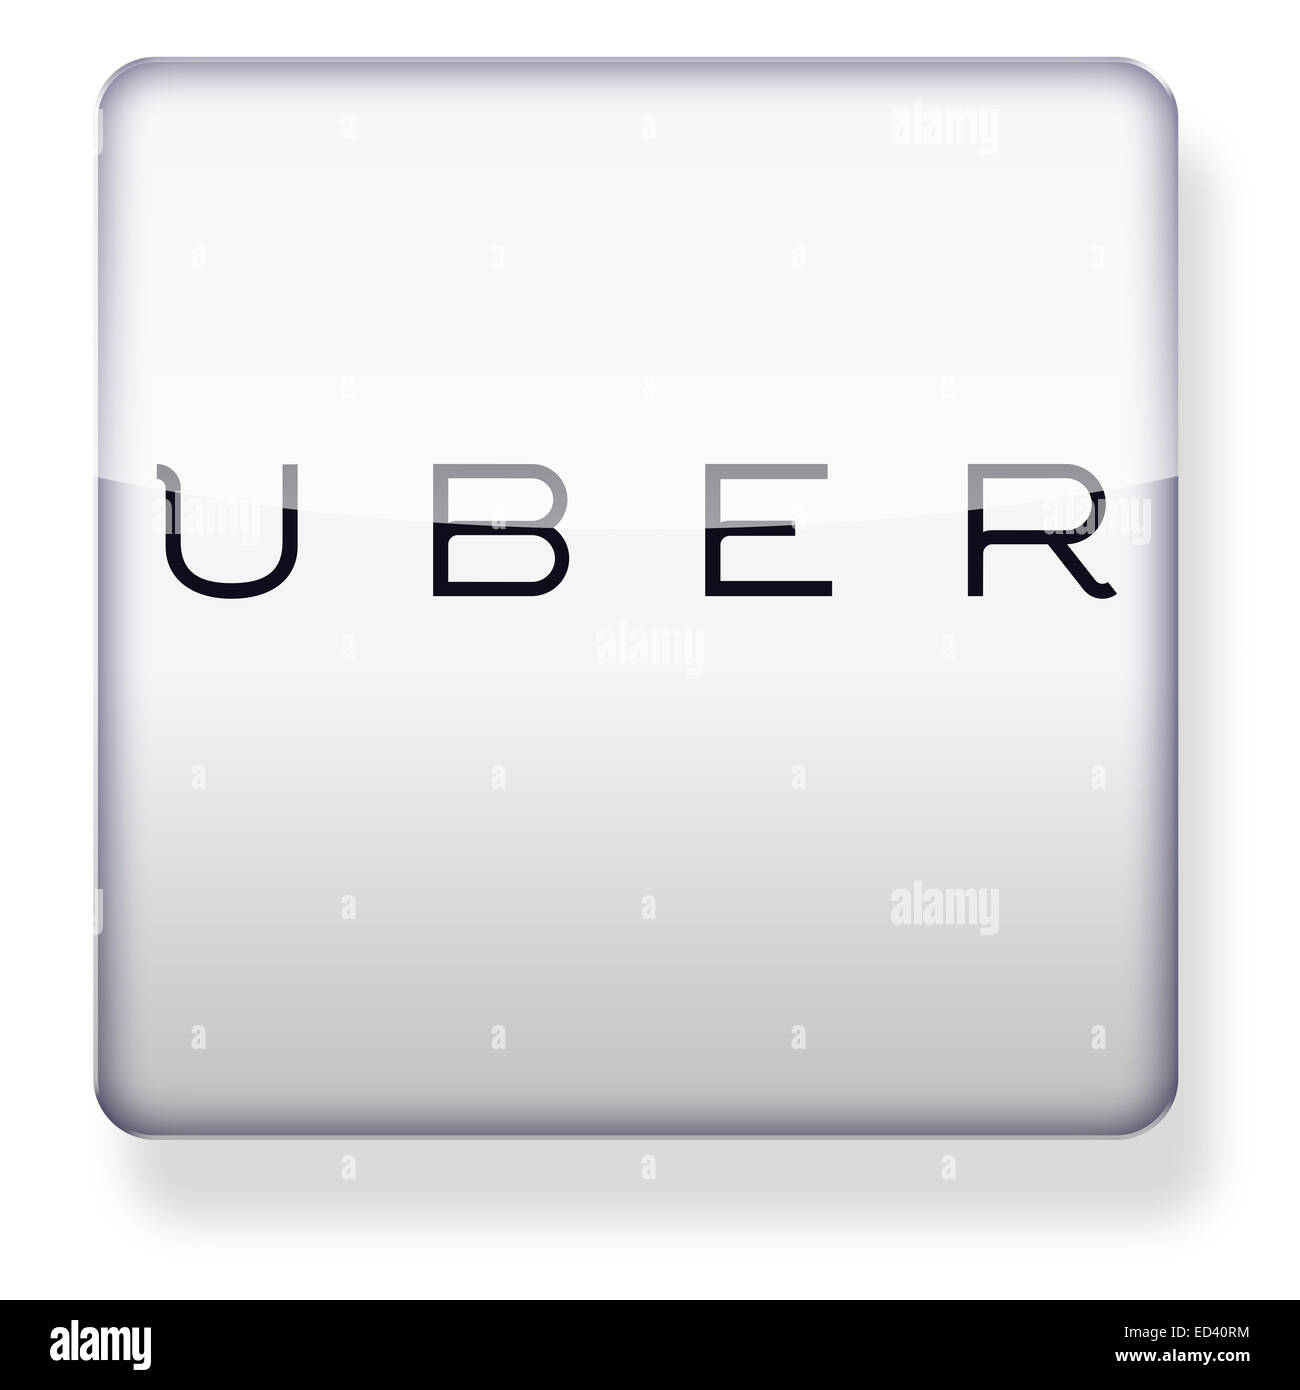 Uber as an app icon. Clipping path included. Stock Photo